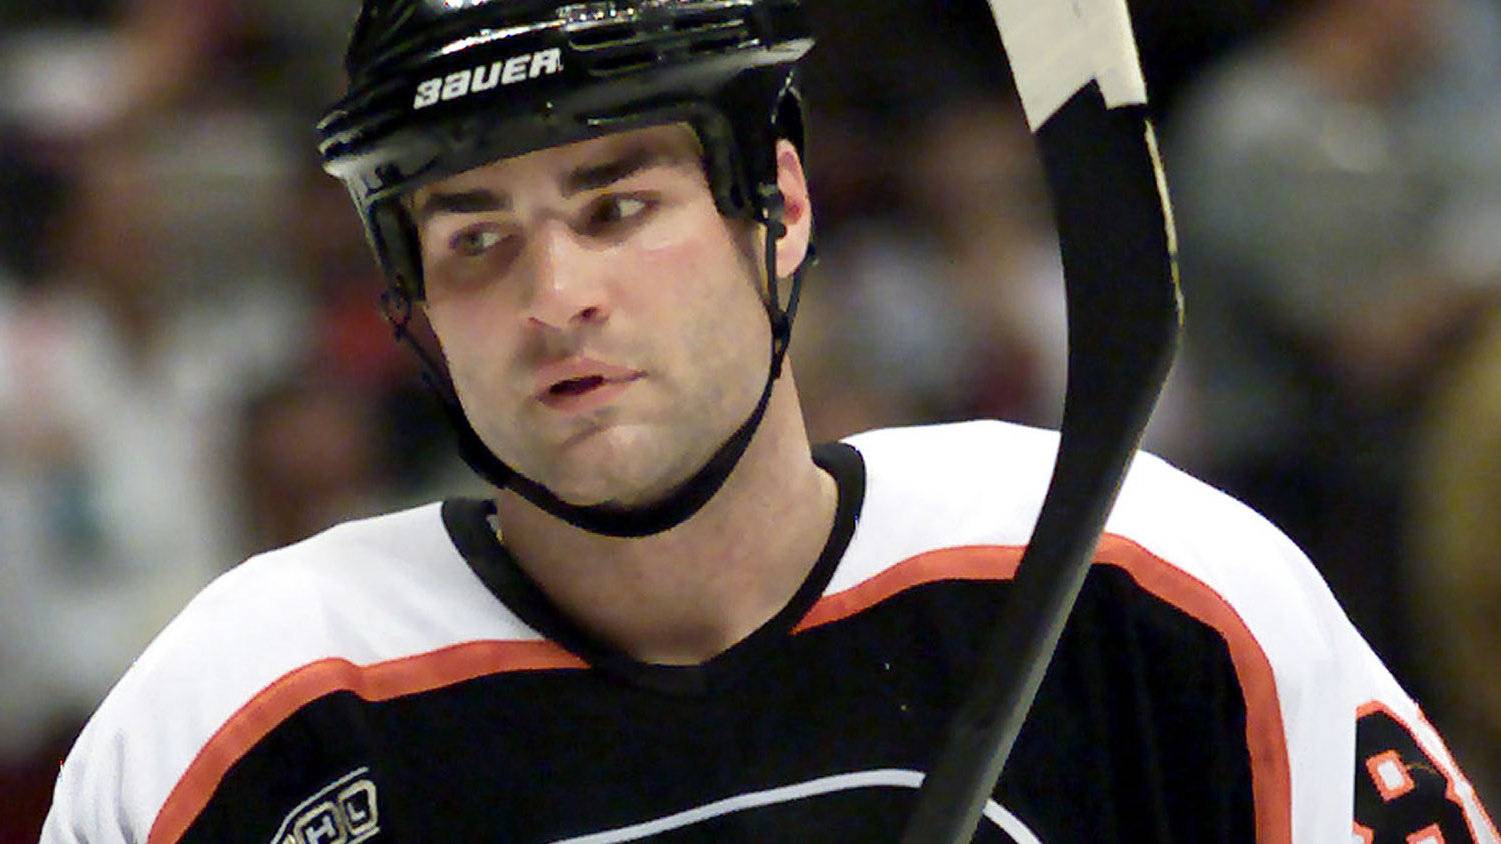 Timing was off when Eric Lindros signed with Maple Leafs